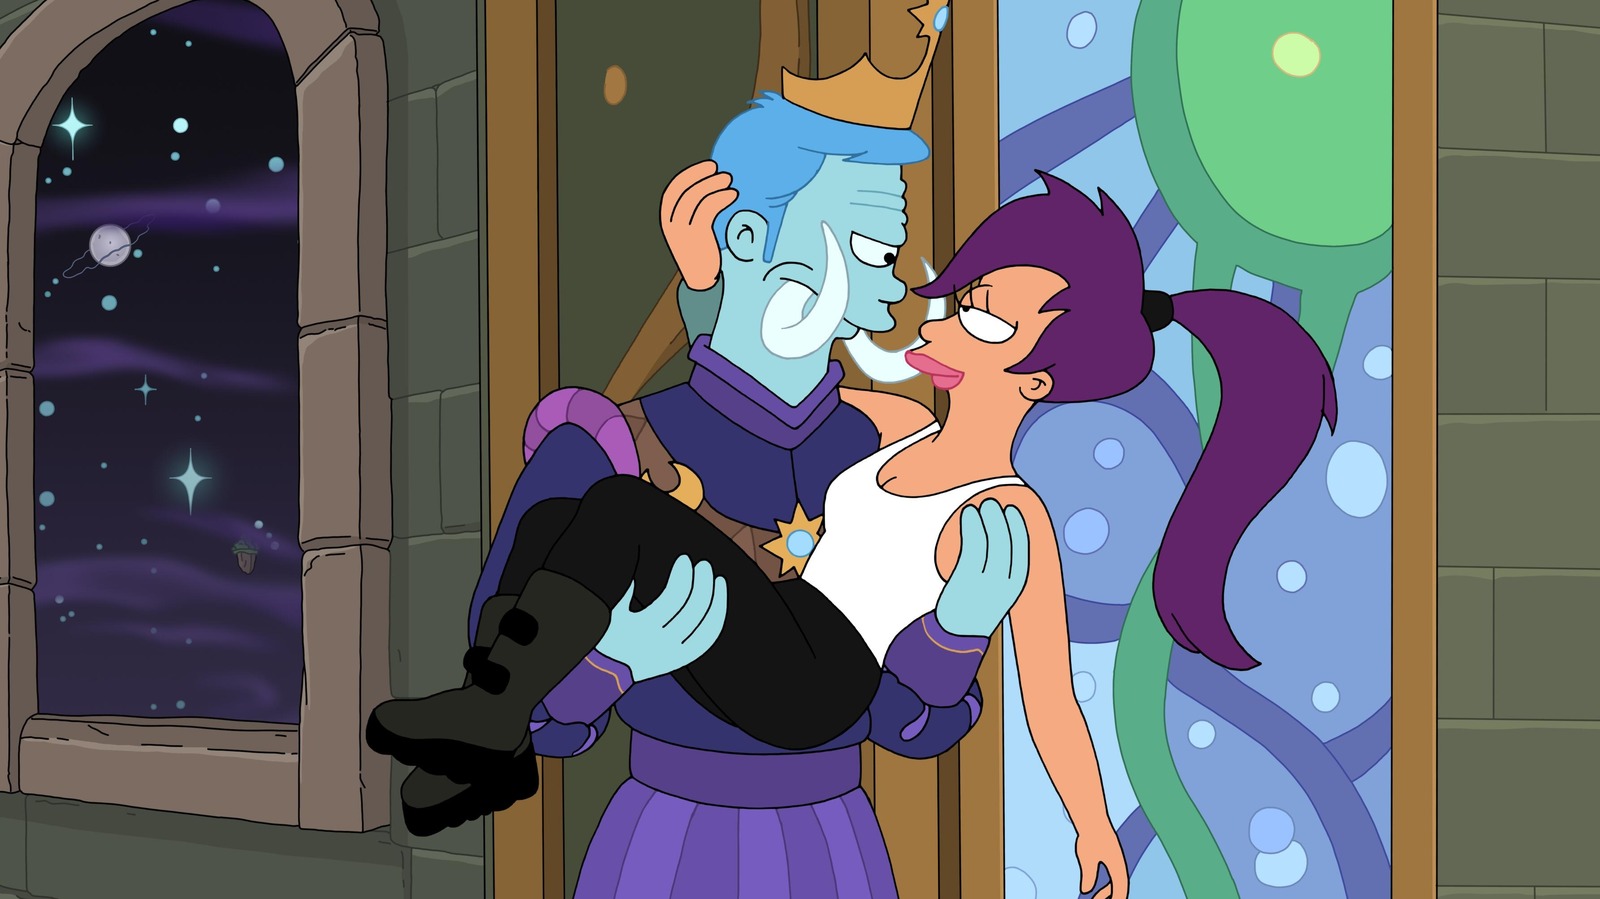 Futurama Season 11 Lands The Punchline On A Decade-Old Joke About The King Of Space